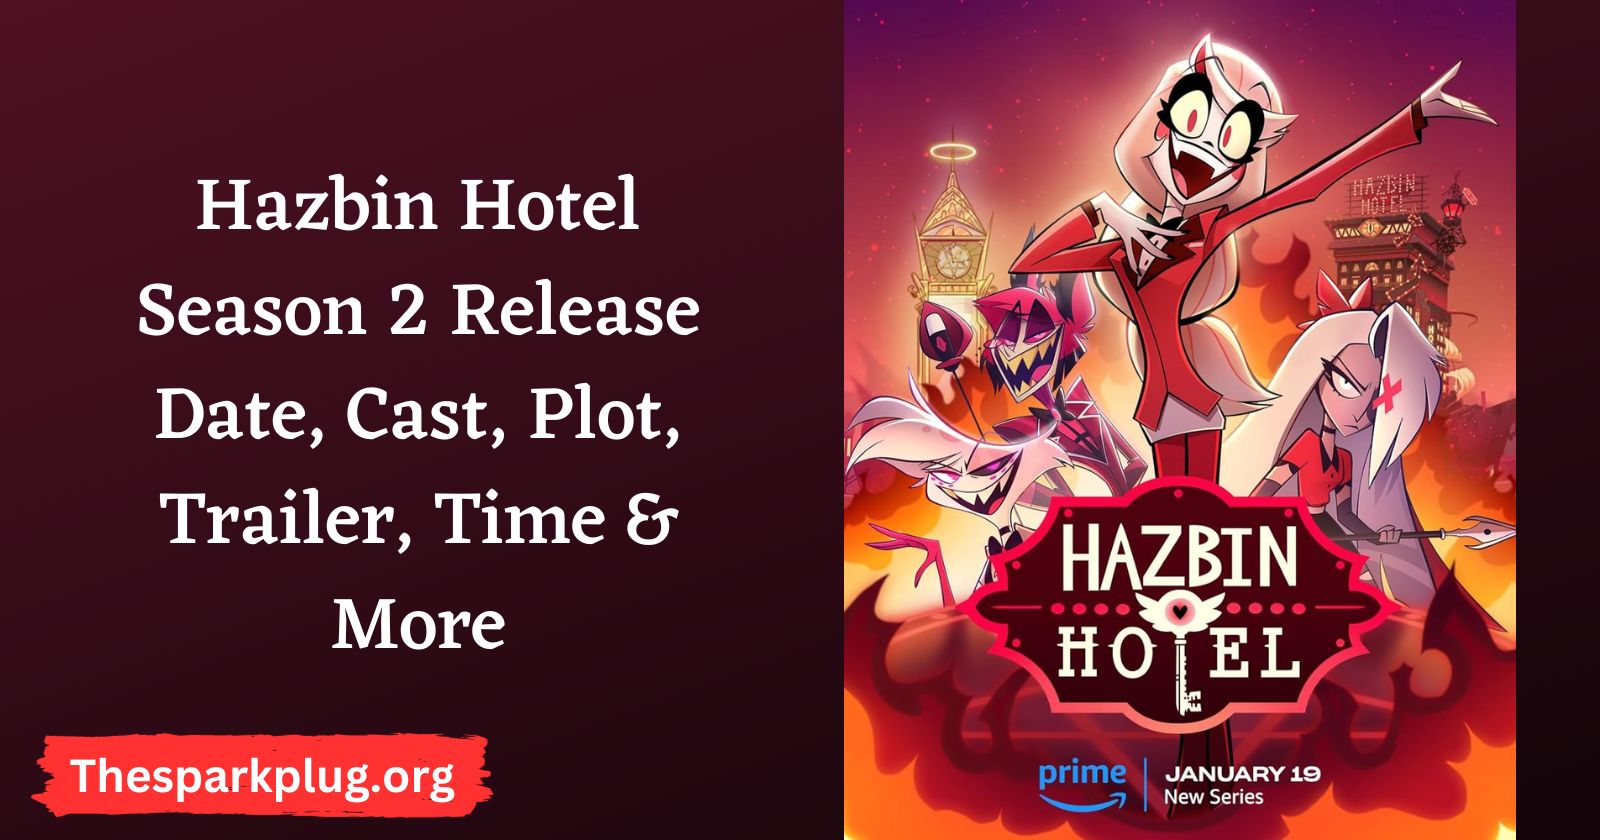 When is the Release Date for Season 2 of Hazbin Hotel? Hazbin Hotel Season 2 Release Date, Cast, Plot, Trailer, Time & More